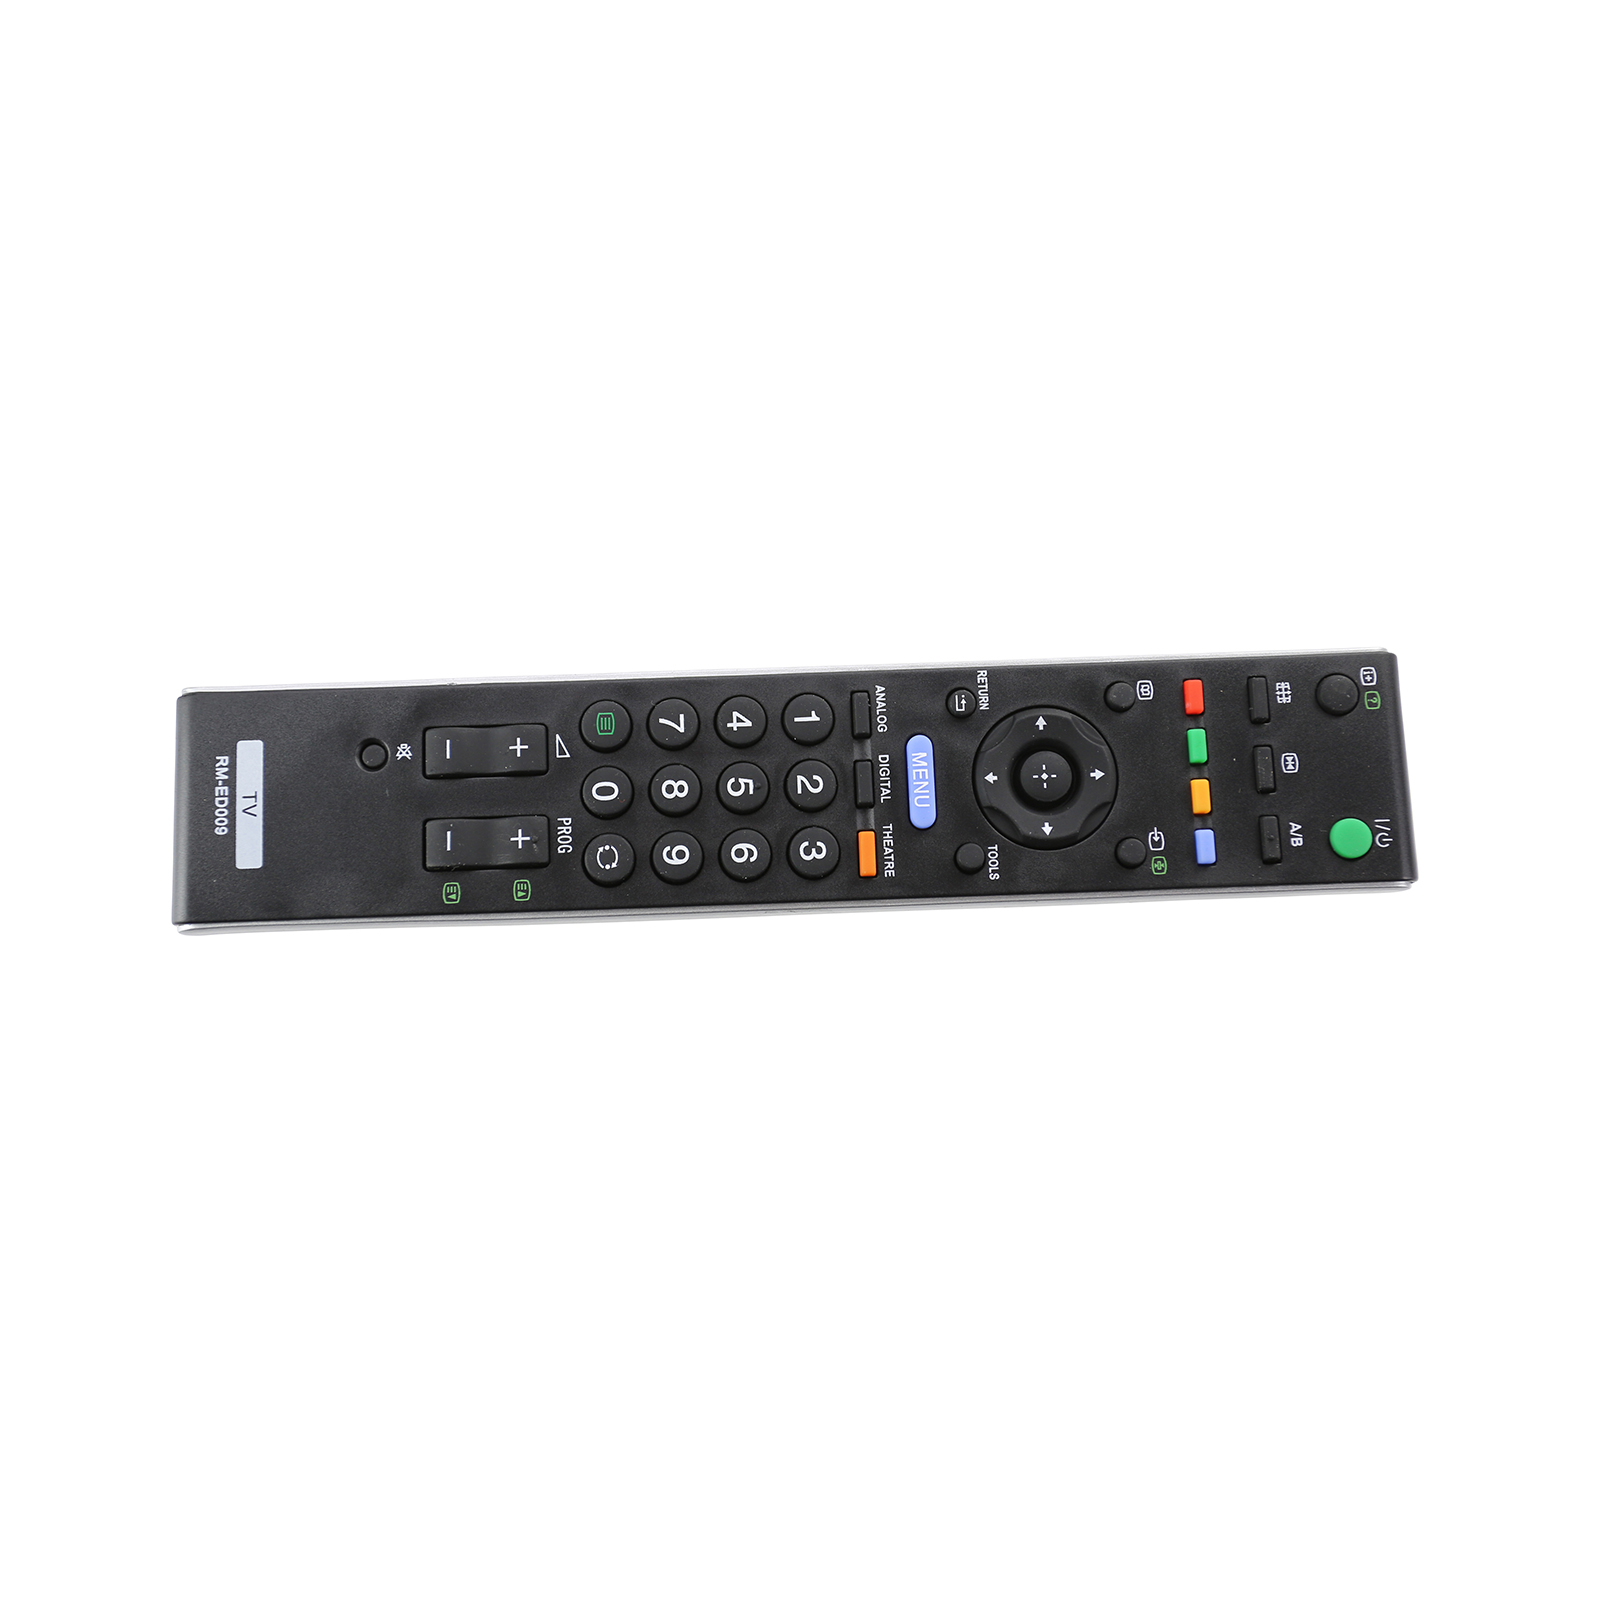 Sony Television Remote Control - RMED009 F4S056